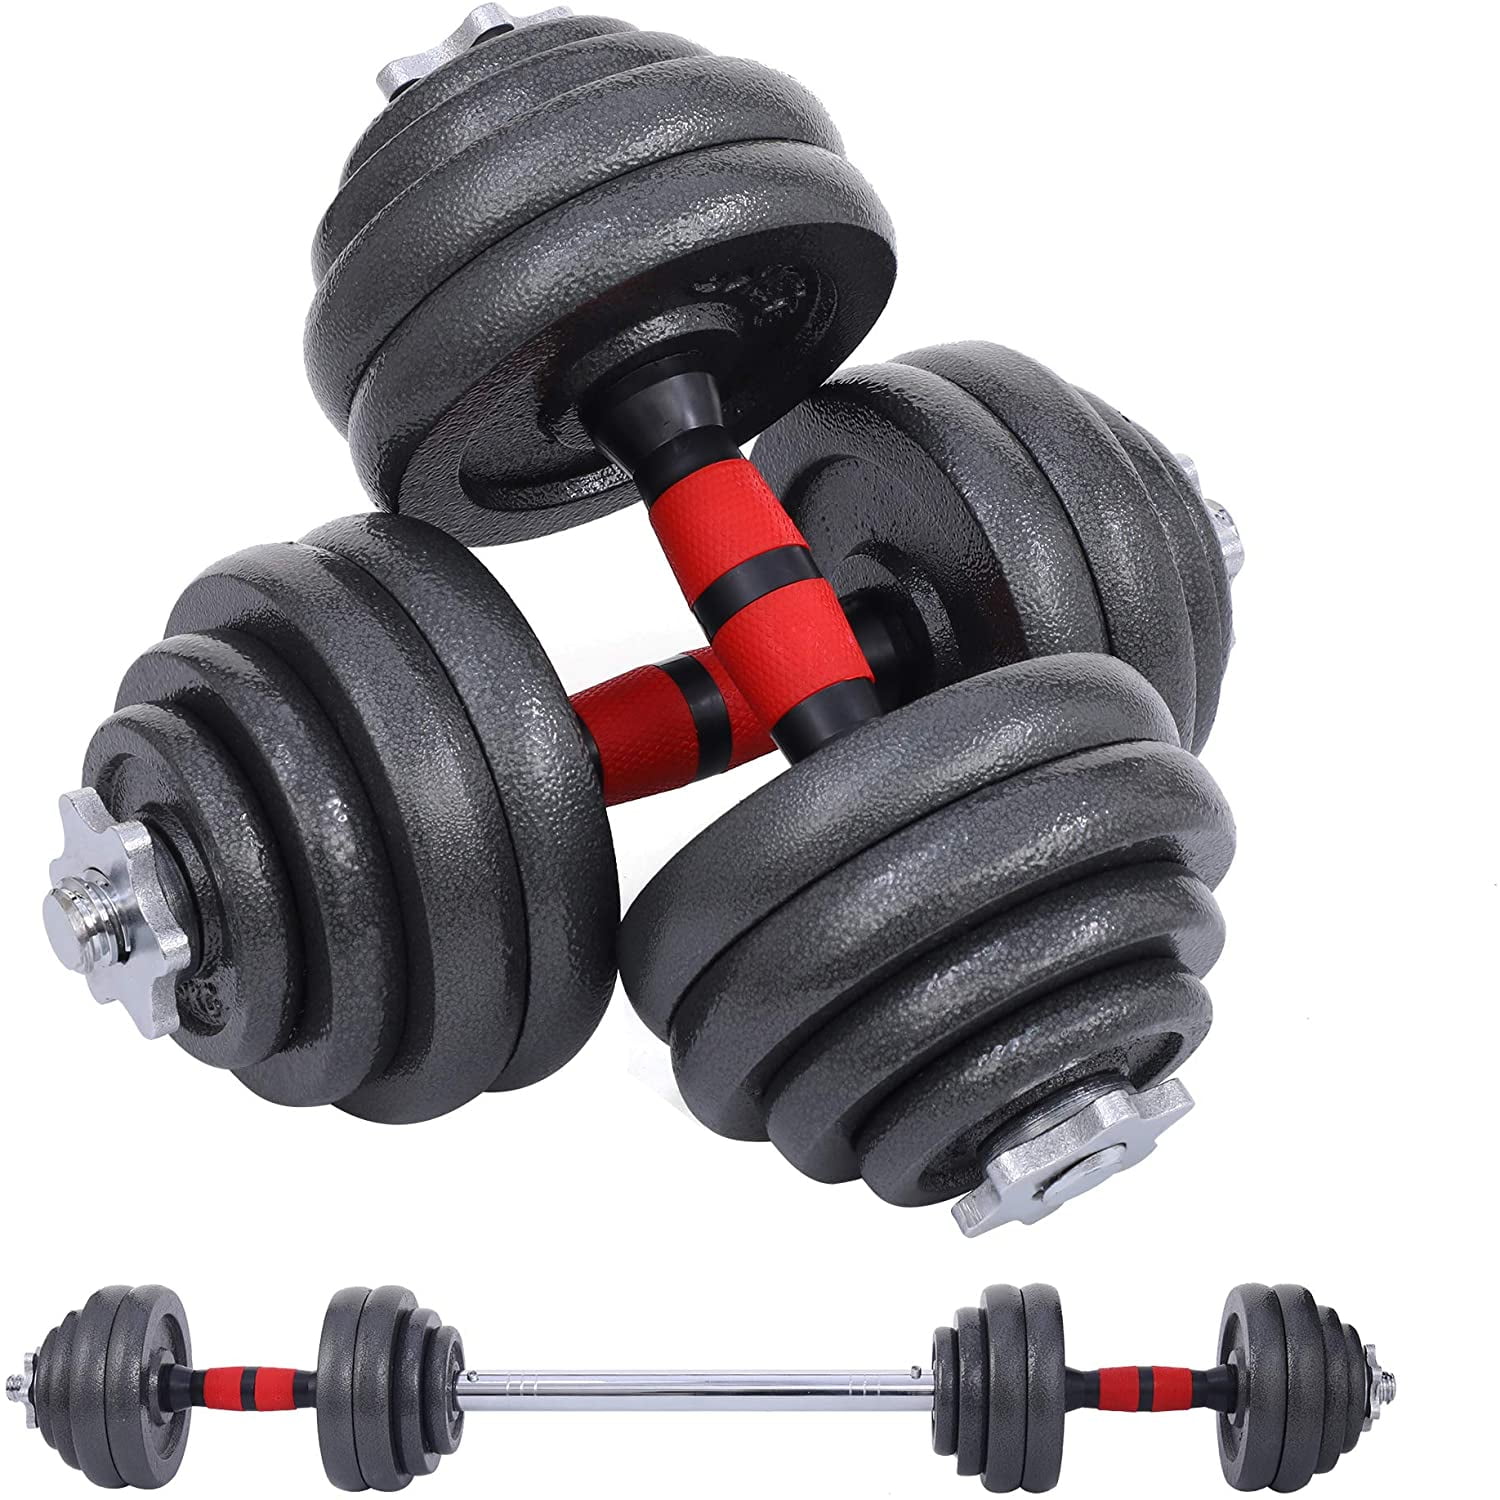 Adjustable GYM Dumbbell Set Weight Barbell Plates Home Workout 22 44 66 88lb 